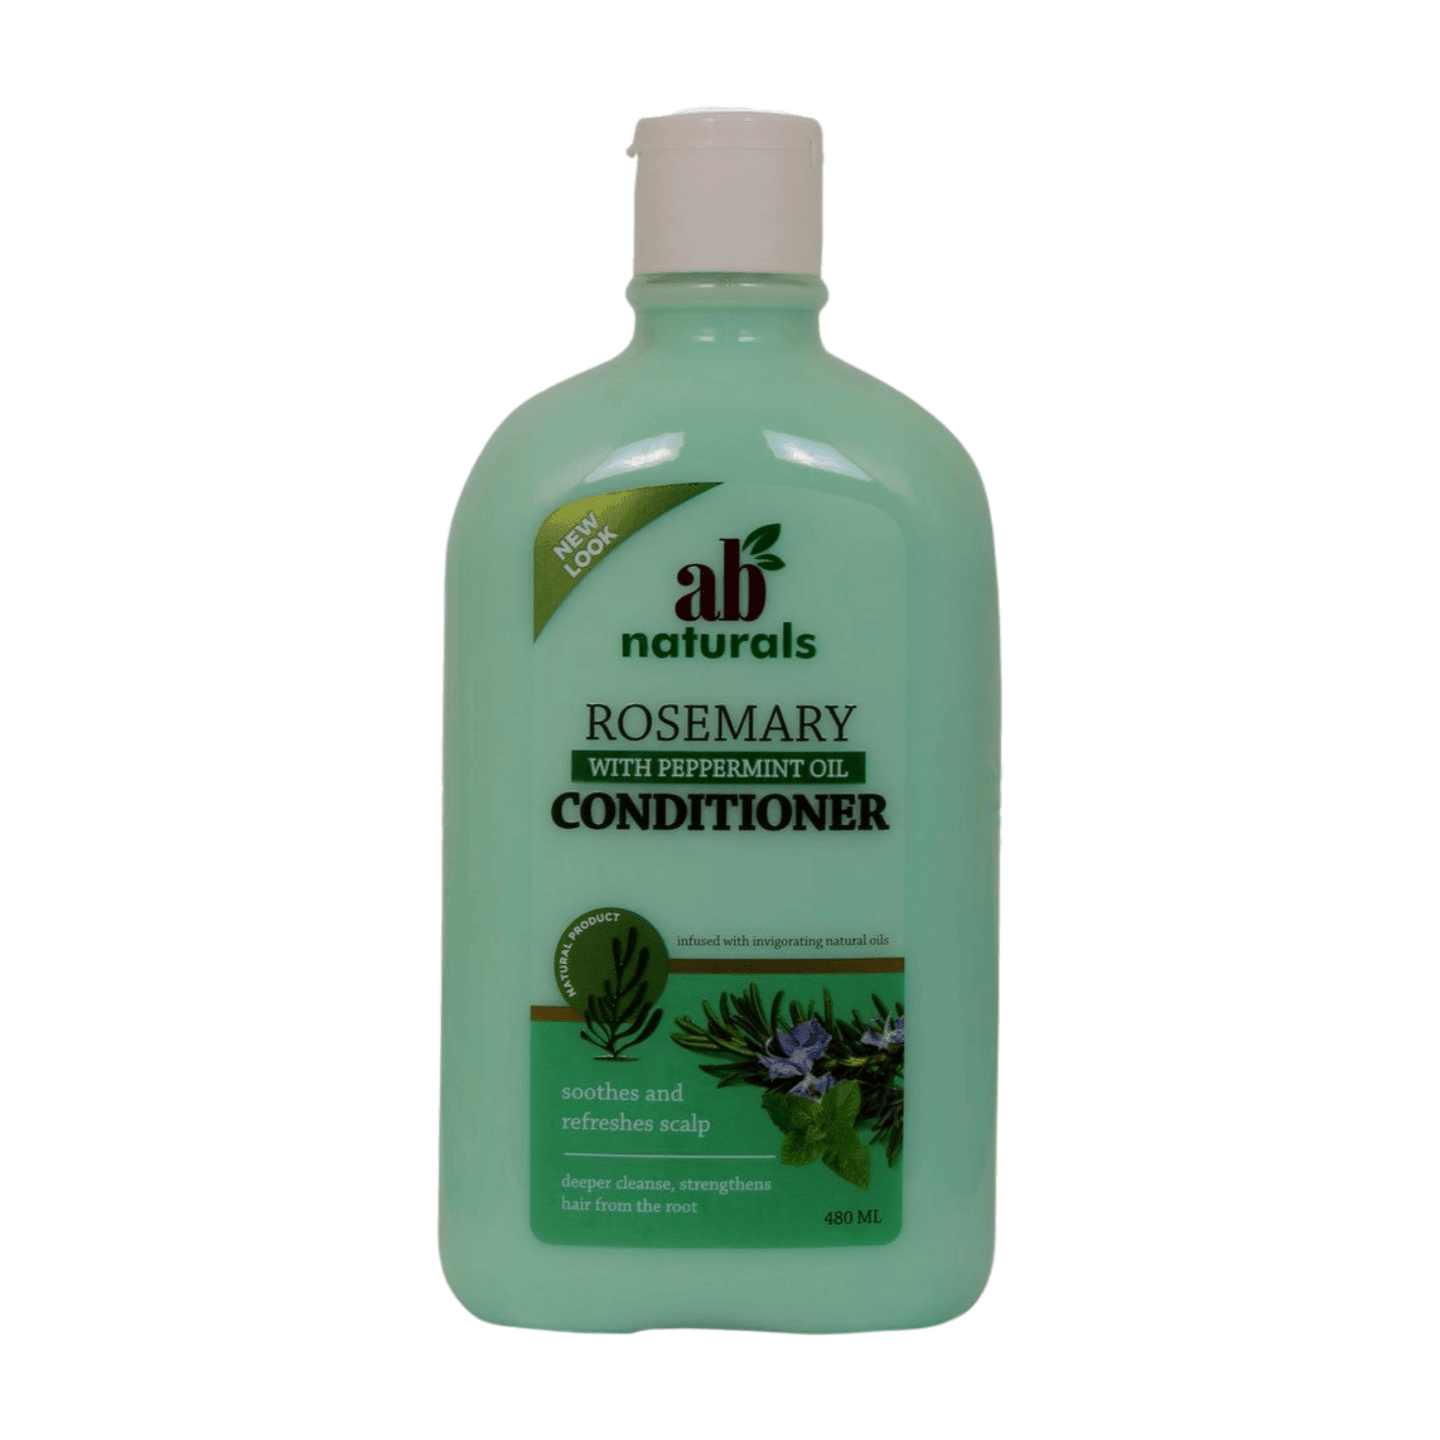 Ab Naturals Rosemary Conditioner 480ml - African Beauty Online